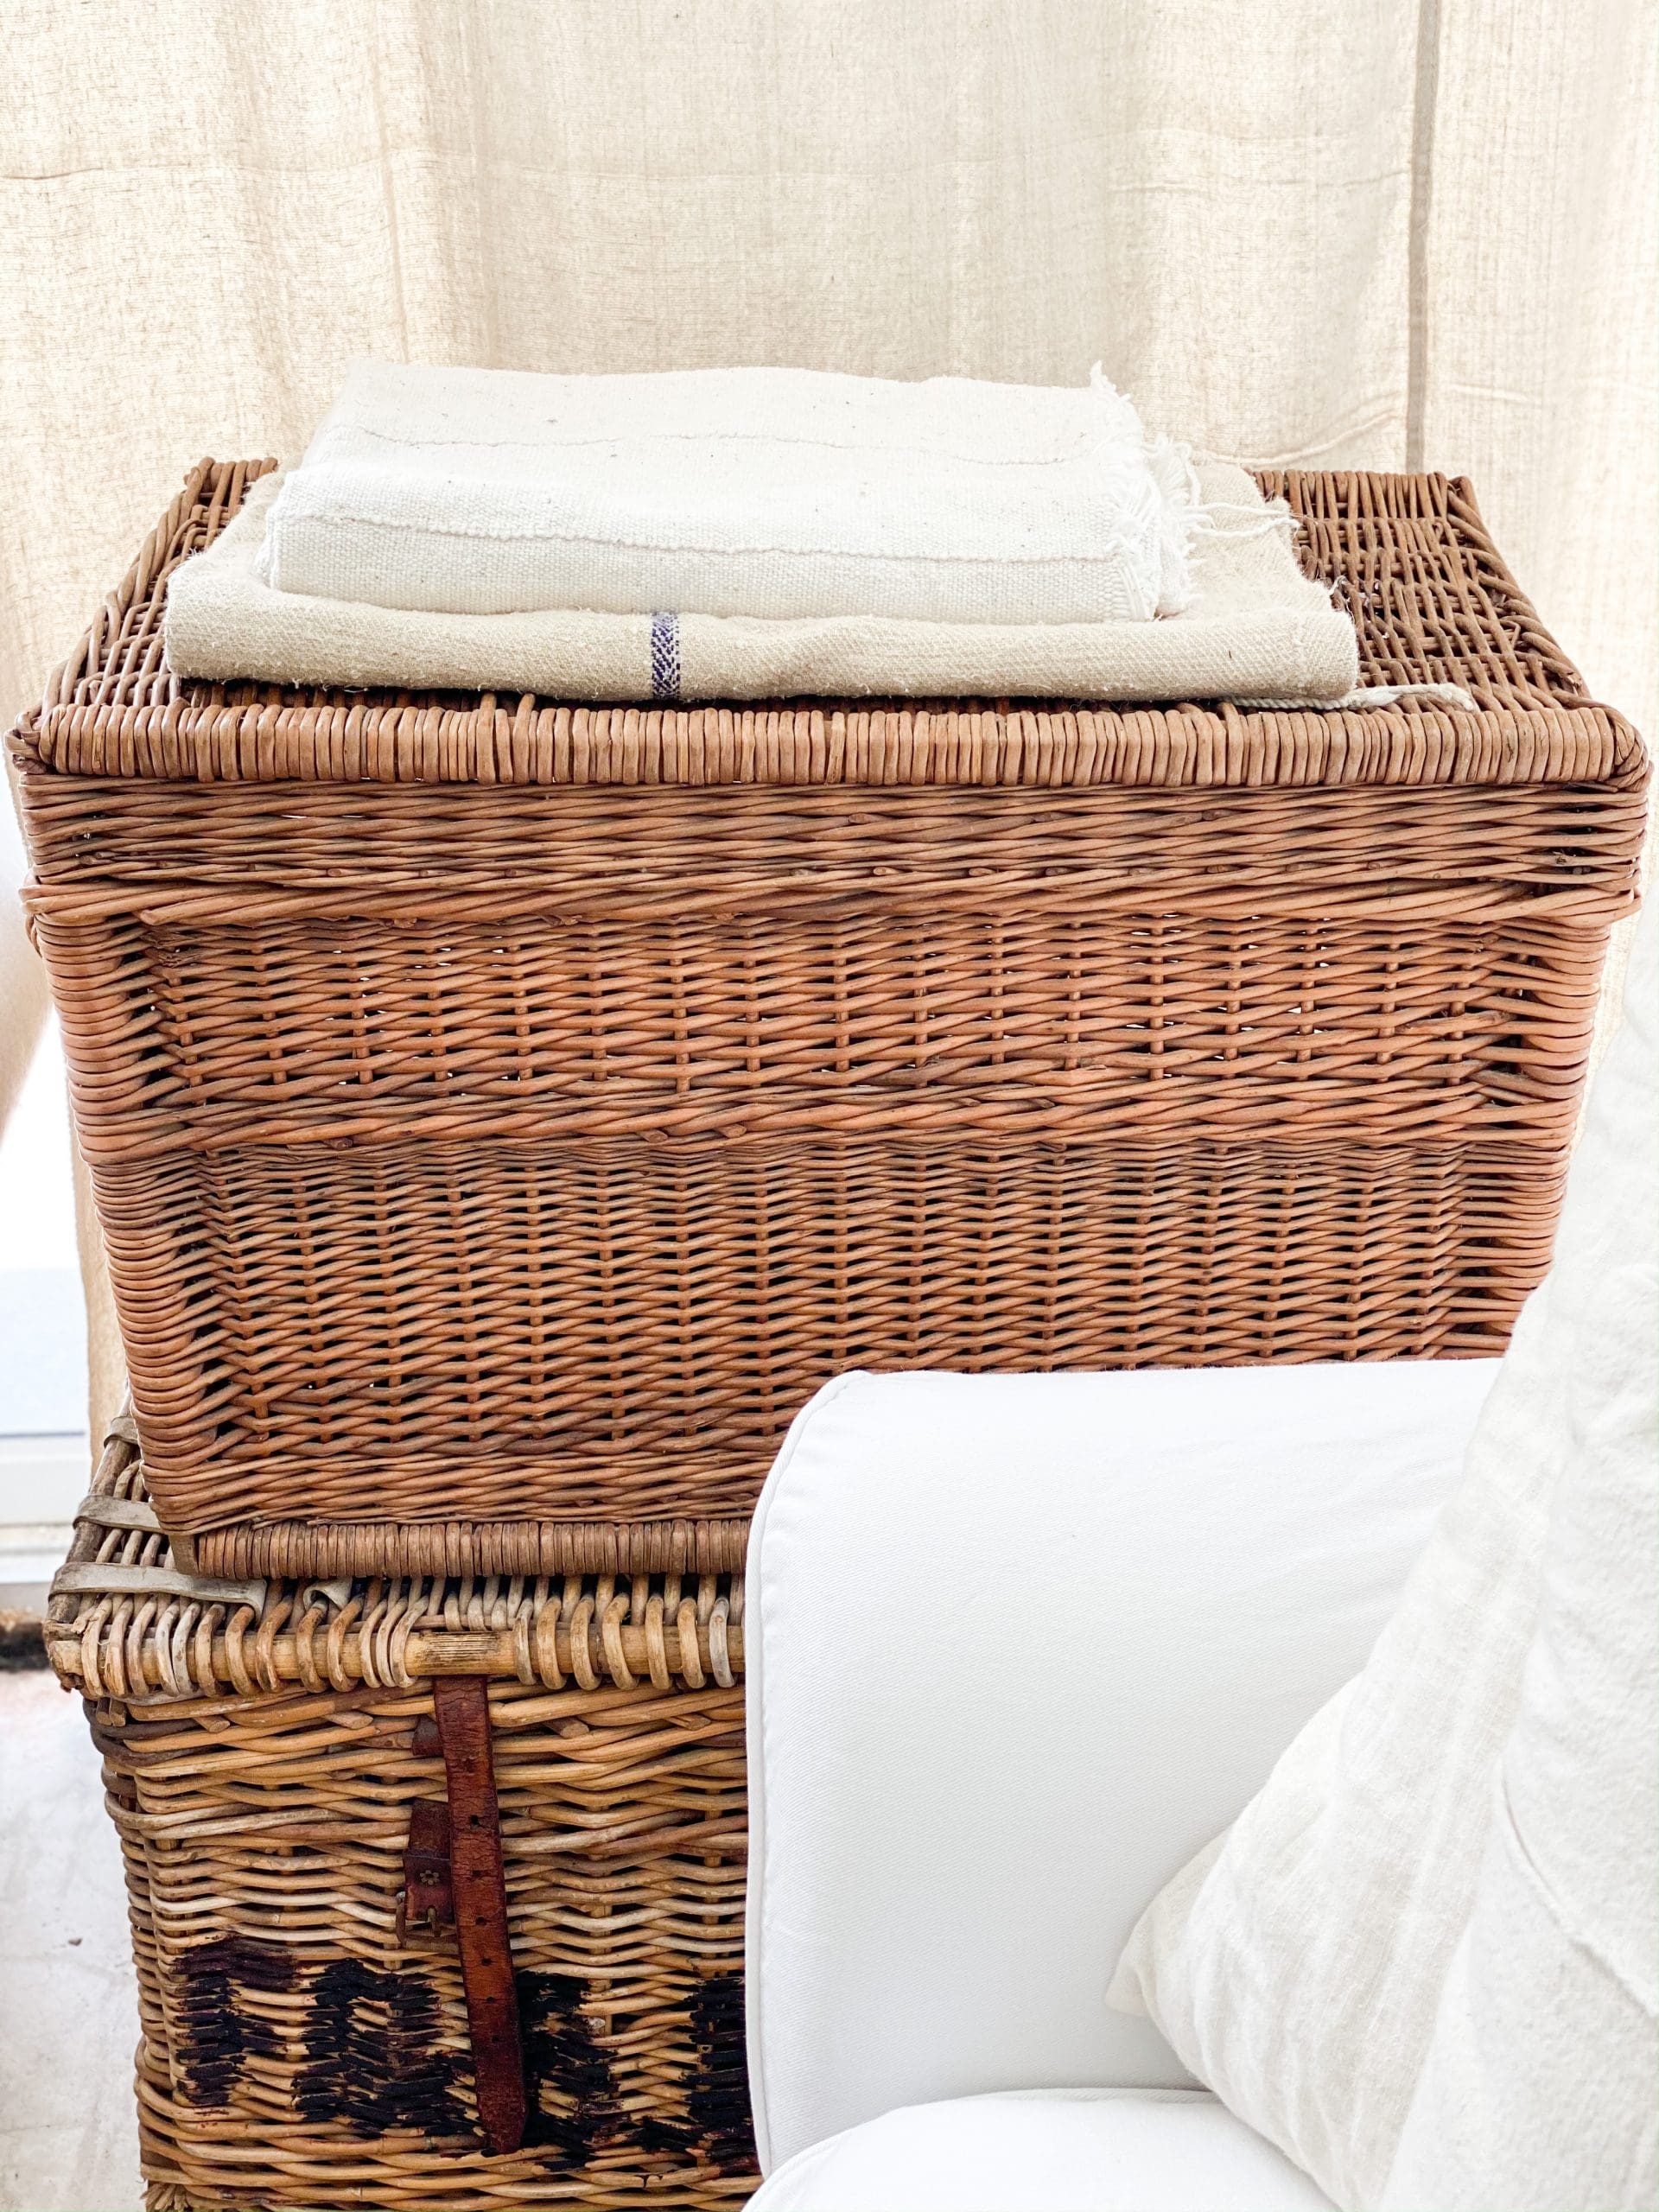 two large vintage woven baskets stacked on top of each other with cozy linen blankets folded on top